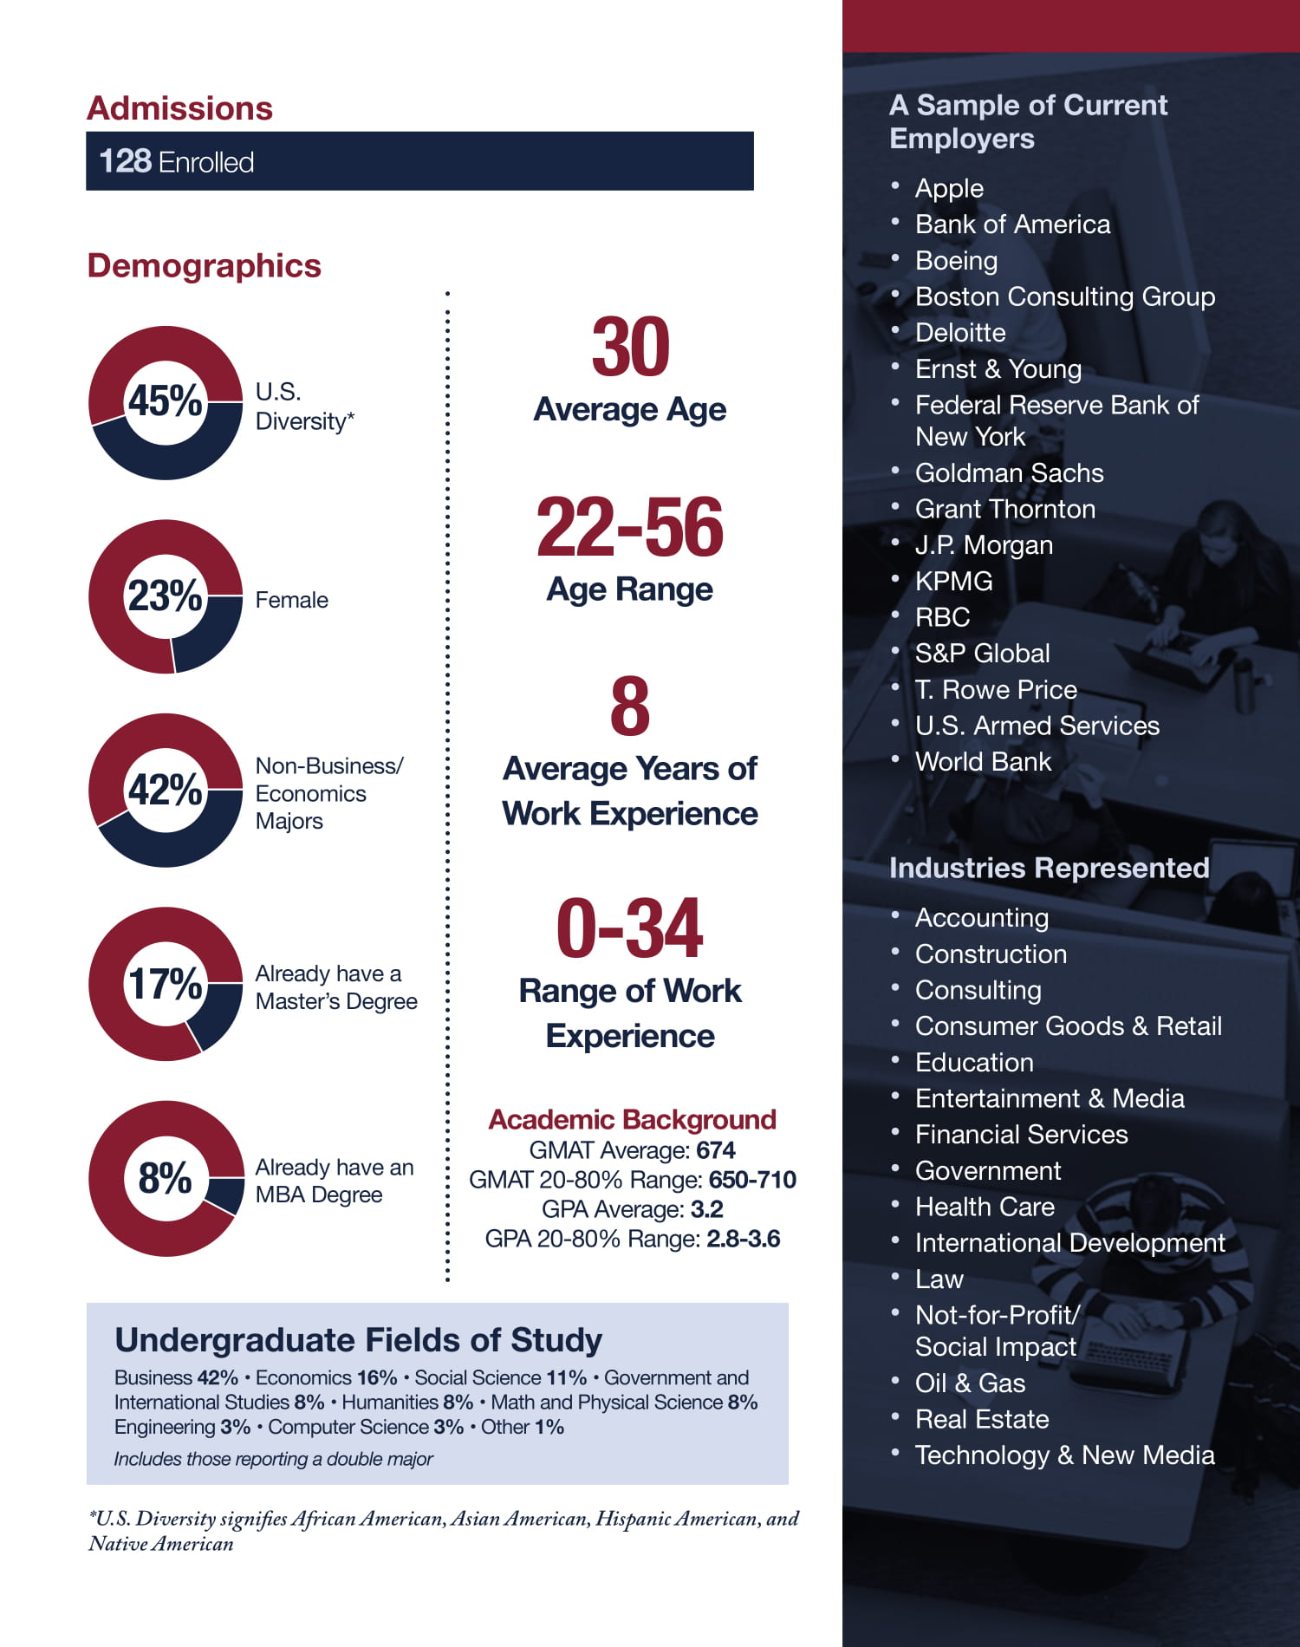 Admissions – 128 Enrolled. Demographics. 45 percent U.S. Diversity (*U.S. Diversity signifies African American, Asian American, Hispanic American, and Native American) 23% Female. 42 percent are non-business and non-economics majors. 17 percent already have a master’s degree 8 percent already have an MBA degree. Average age is 30. Age ranges from 22 to 56. Students have 8 years of work experience on average and work experience ranges from 0 to 34 years. Academic Background. The Average GMAT score is 674 The GMAT 20 through 80 percent range is 650-710. The GPA average is 3.2. The GPA 20-80 percent range is 2.8-3.6 Undergraduate fields of study include 42 percent business, 16 percent economics, 11 percent social science, 8 percent government and international studies, 8 percent humanities, 8 percent math and physical science, 3 percent engineering, 3 percent computer science, and 1 percent other. This includes those reporting a double major. A sample of current employers includes Apple, Bank of America, Boeing, Boston Consulting Group, Deloitte, Ernst & Young, Federal Reserve Bank of New York, Goldman Sachs, Grant Thornton, J.P. Morgan, KPMG, RBC, S&P Global, T. Rowe Price, U.S. Armed Forces, and World Bank. Industries represented include accounting, construction, consulting, consumer goods and retail, education, entertainment and media, financial services, government, health care, international development, law, not-for-profit or social impact, oil and gas, real estate and technology and new media.